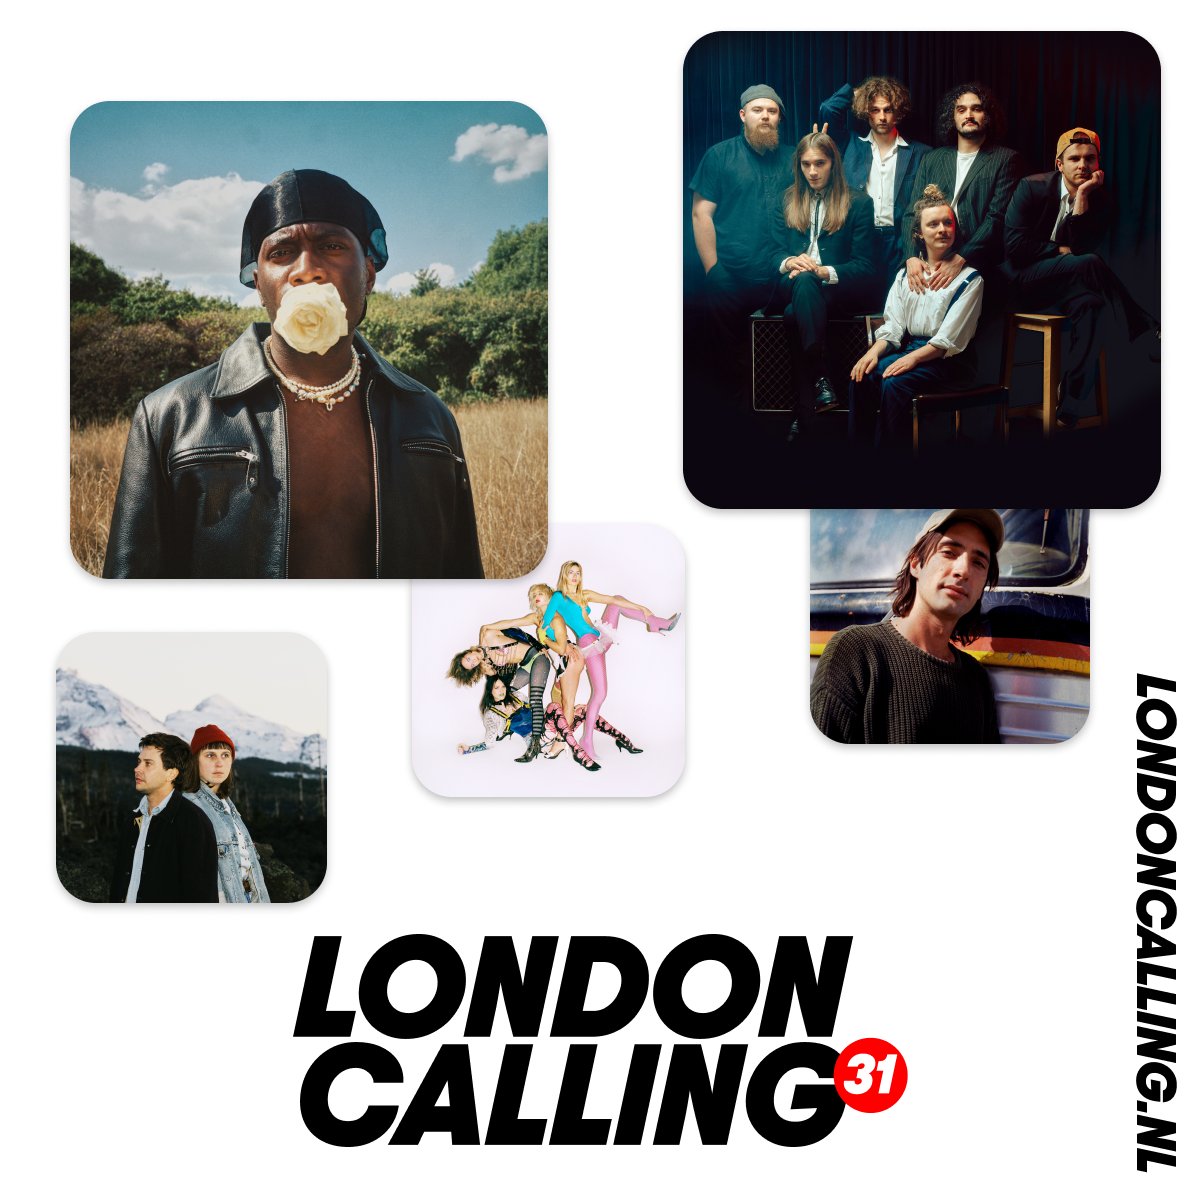 With the addition of @CVCband_, @cumgirl8_, @ffflasher, @MasterPeaceLDN and Sylvie, the line-up for London Calling Festival is now complete. And it's bigger than ever. Info & tickets through londoncalling.nl